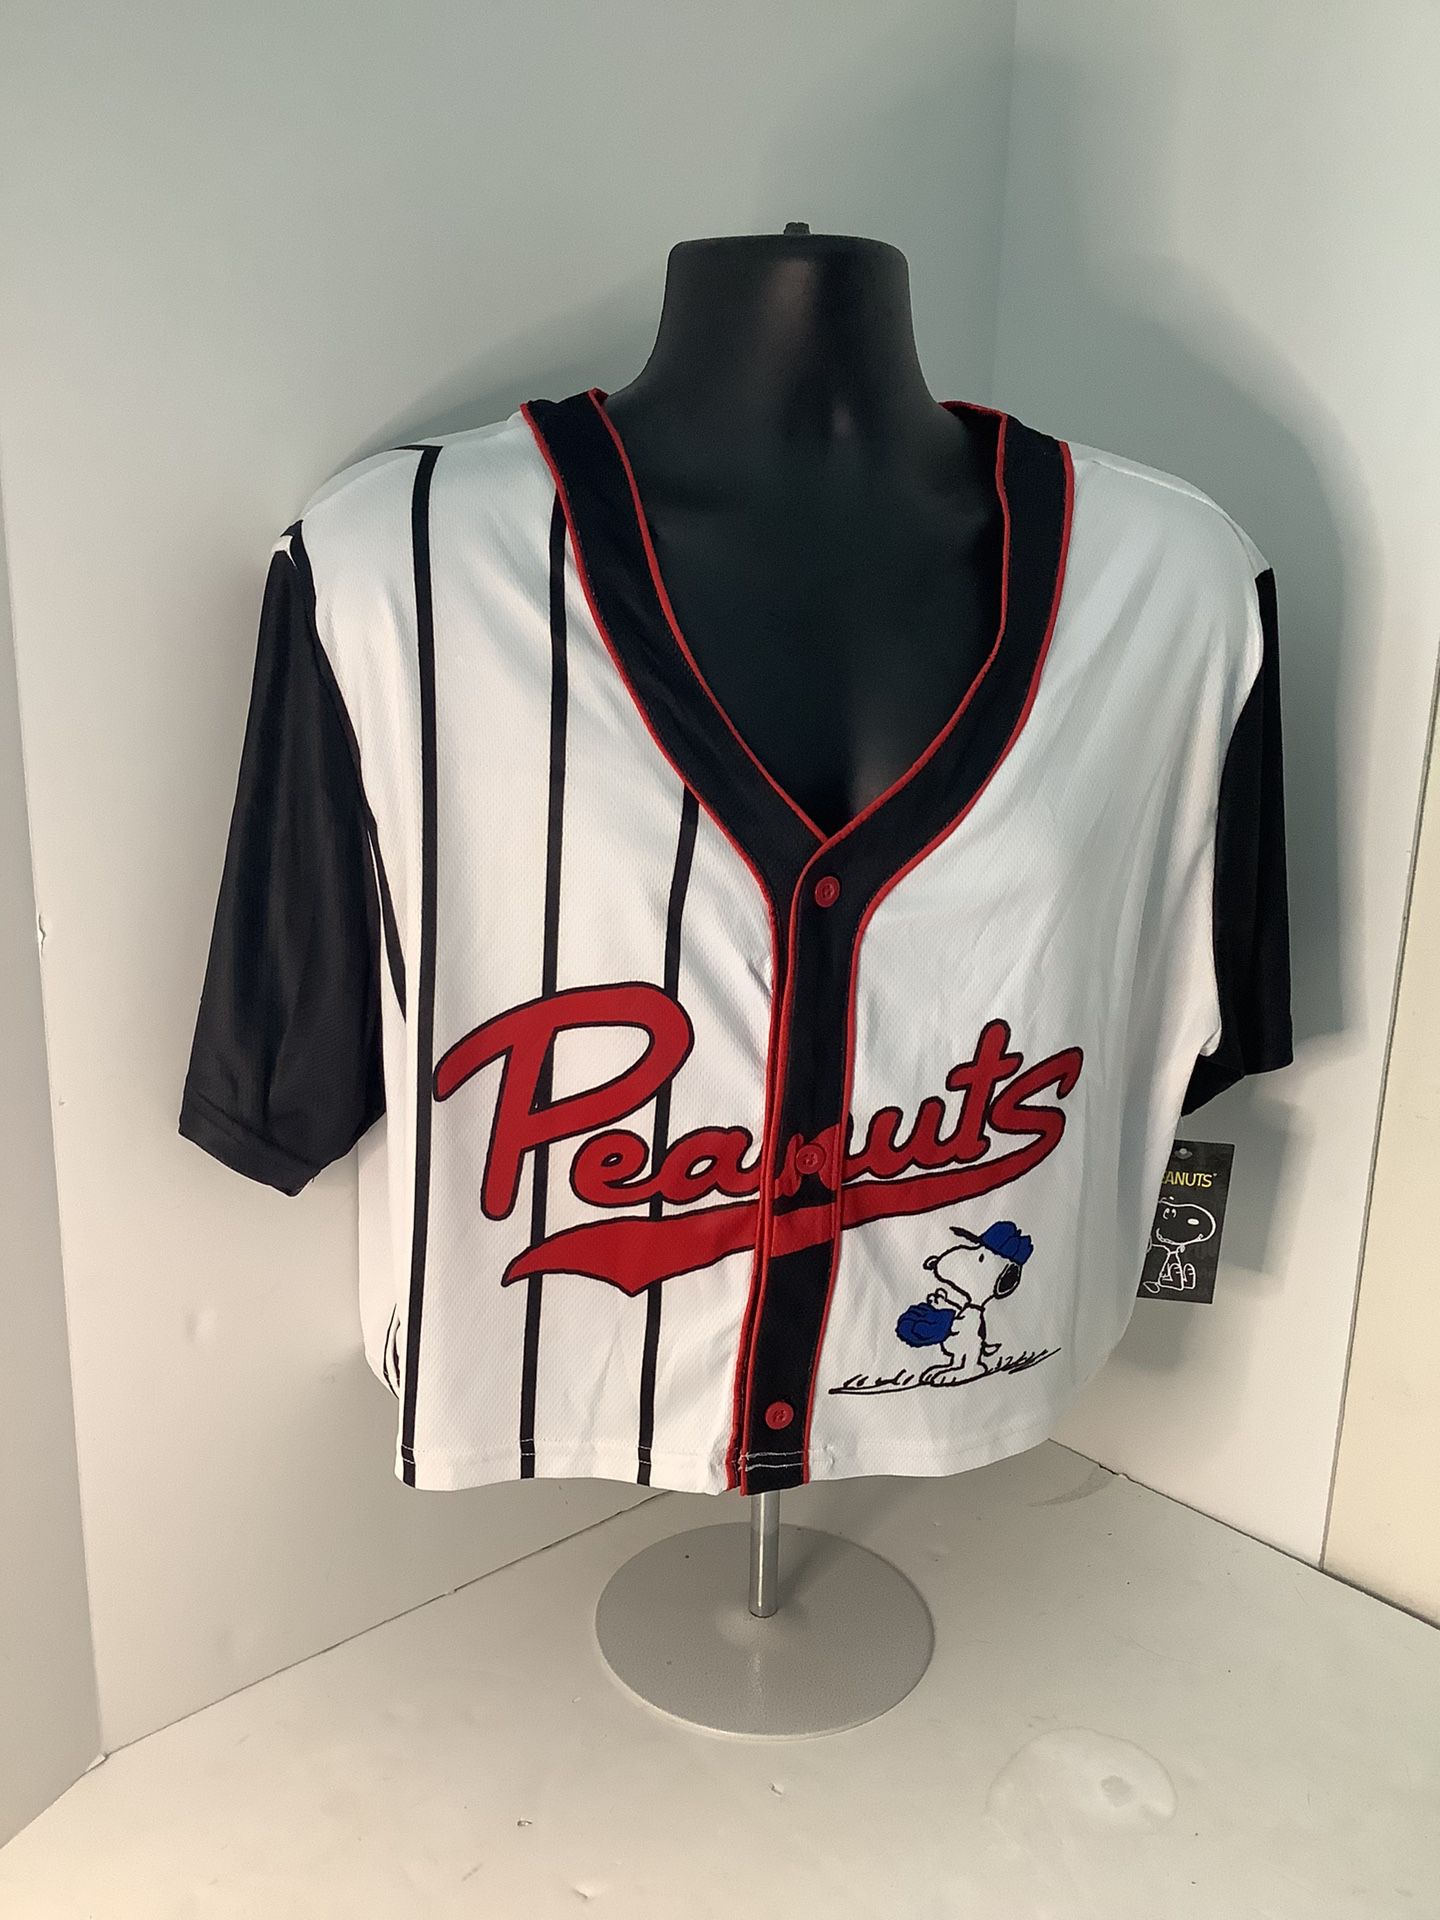 New Womens 2XL Peanuts Crop Baseball Fashion Jersey for Sale in La Marque,  TX - OfferUp